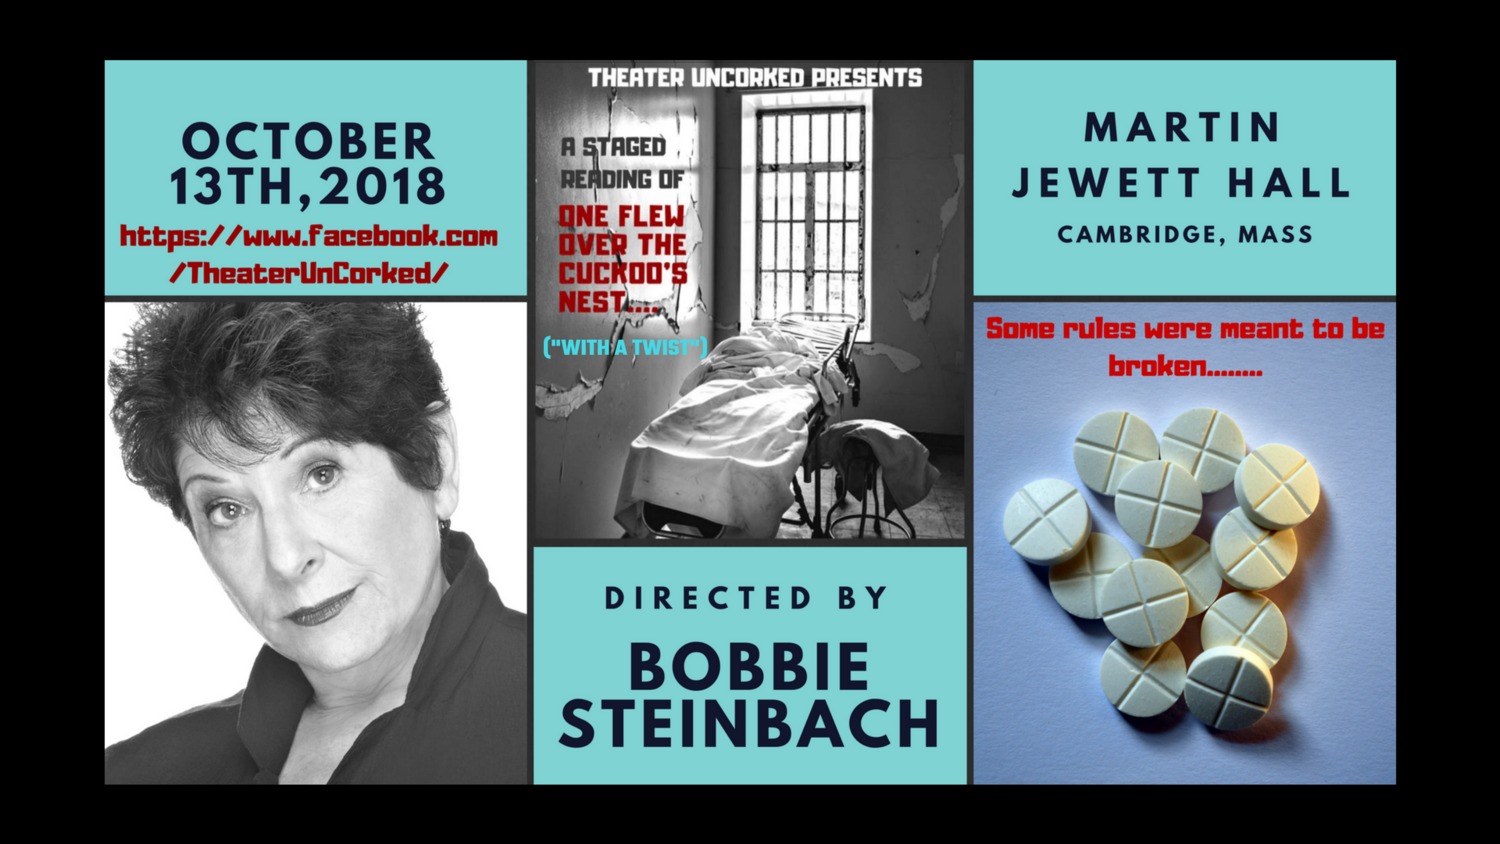 We are thrilled to have the Award Winning Bobbie Steinbach directing our production! 1